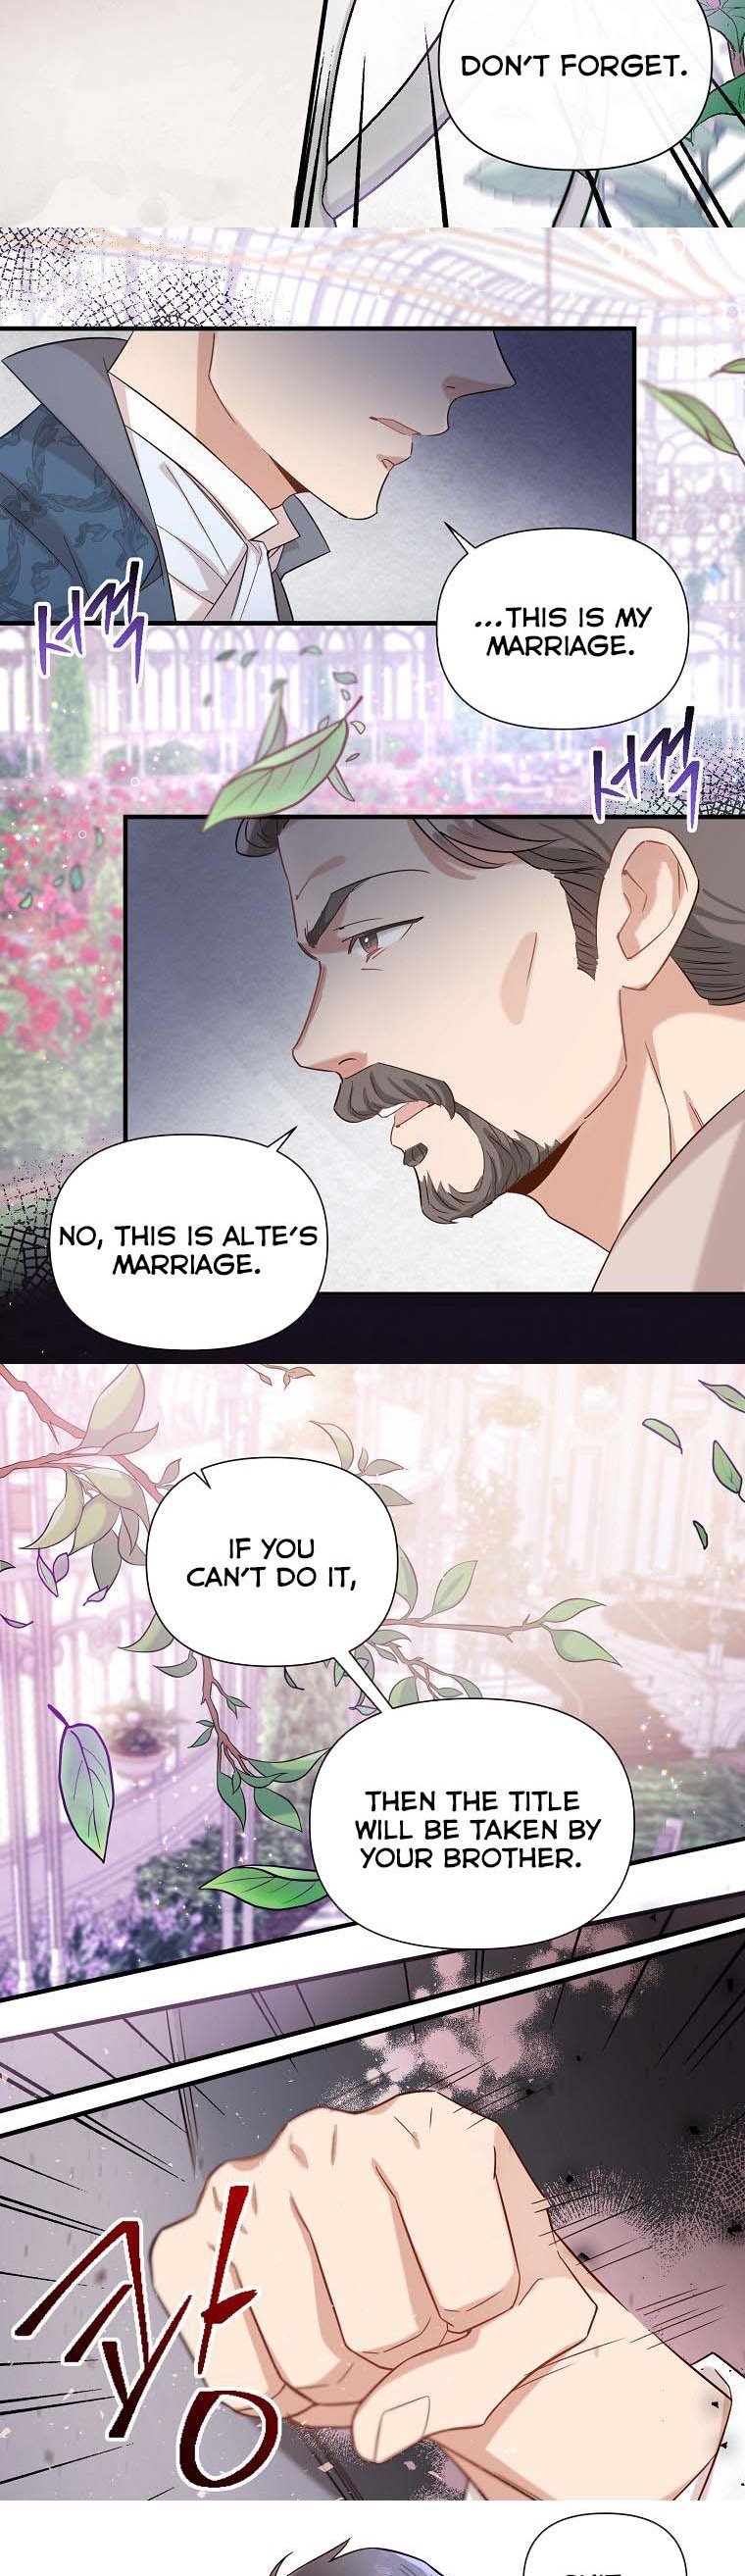 Marriage B chapter 16